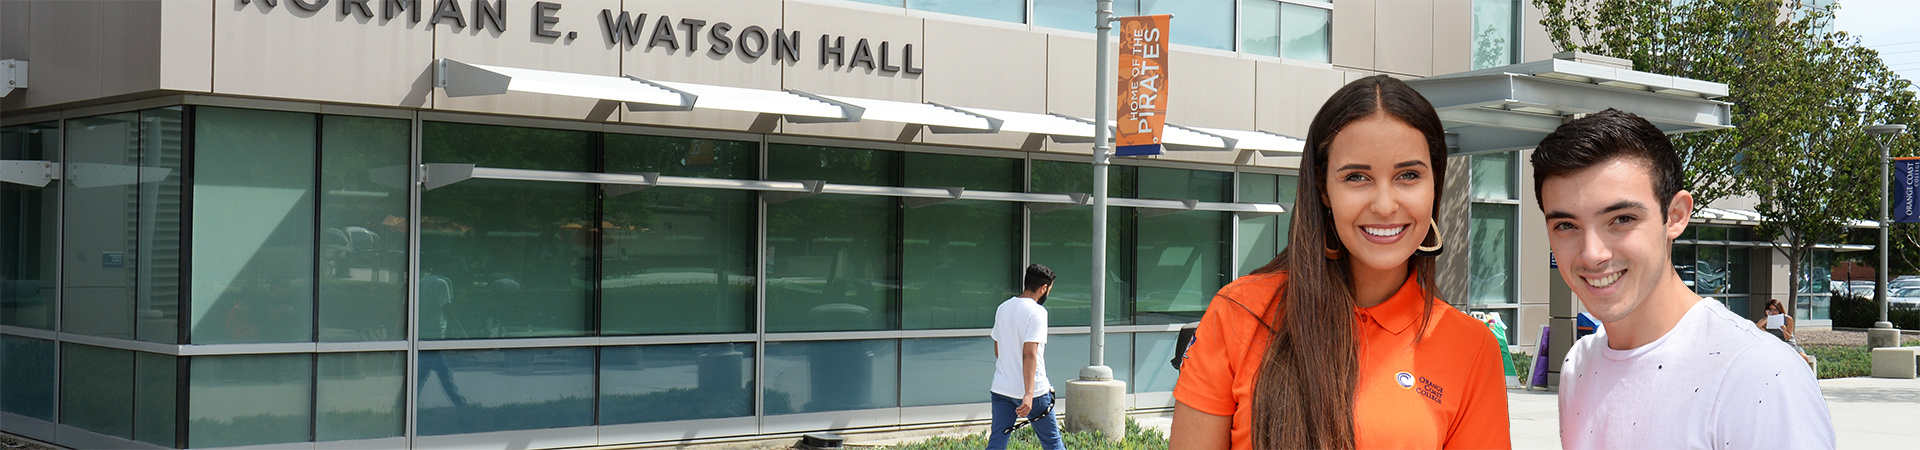 2 students in front of the enrollment center entrance